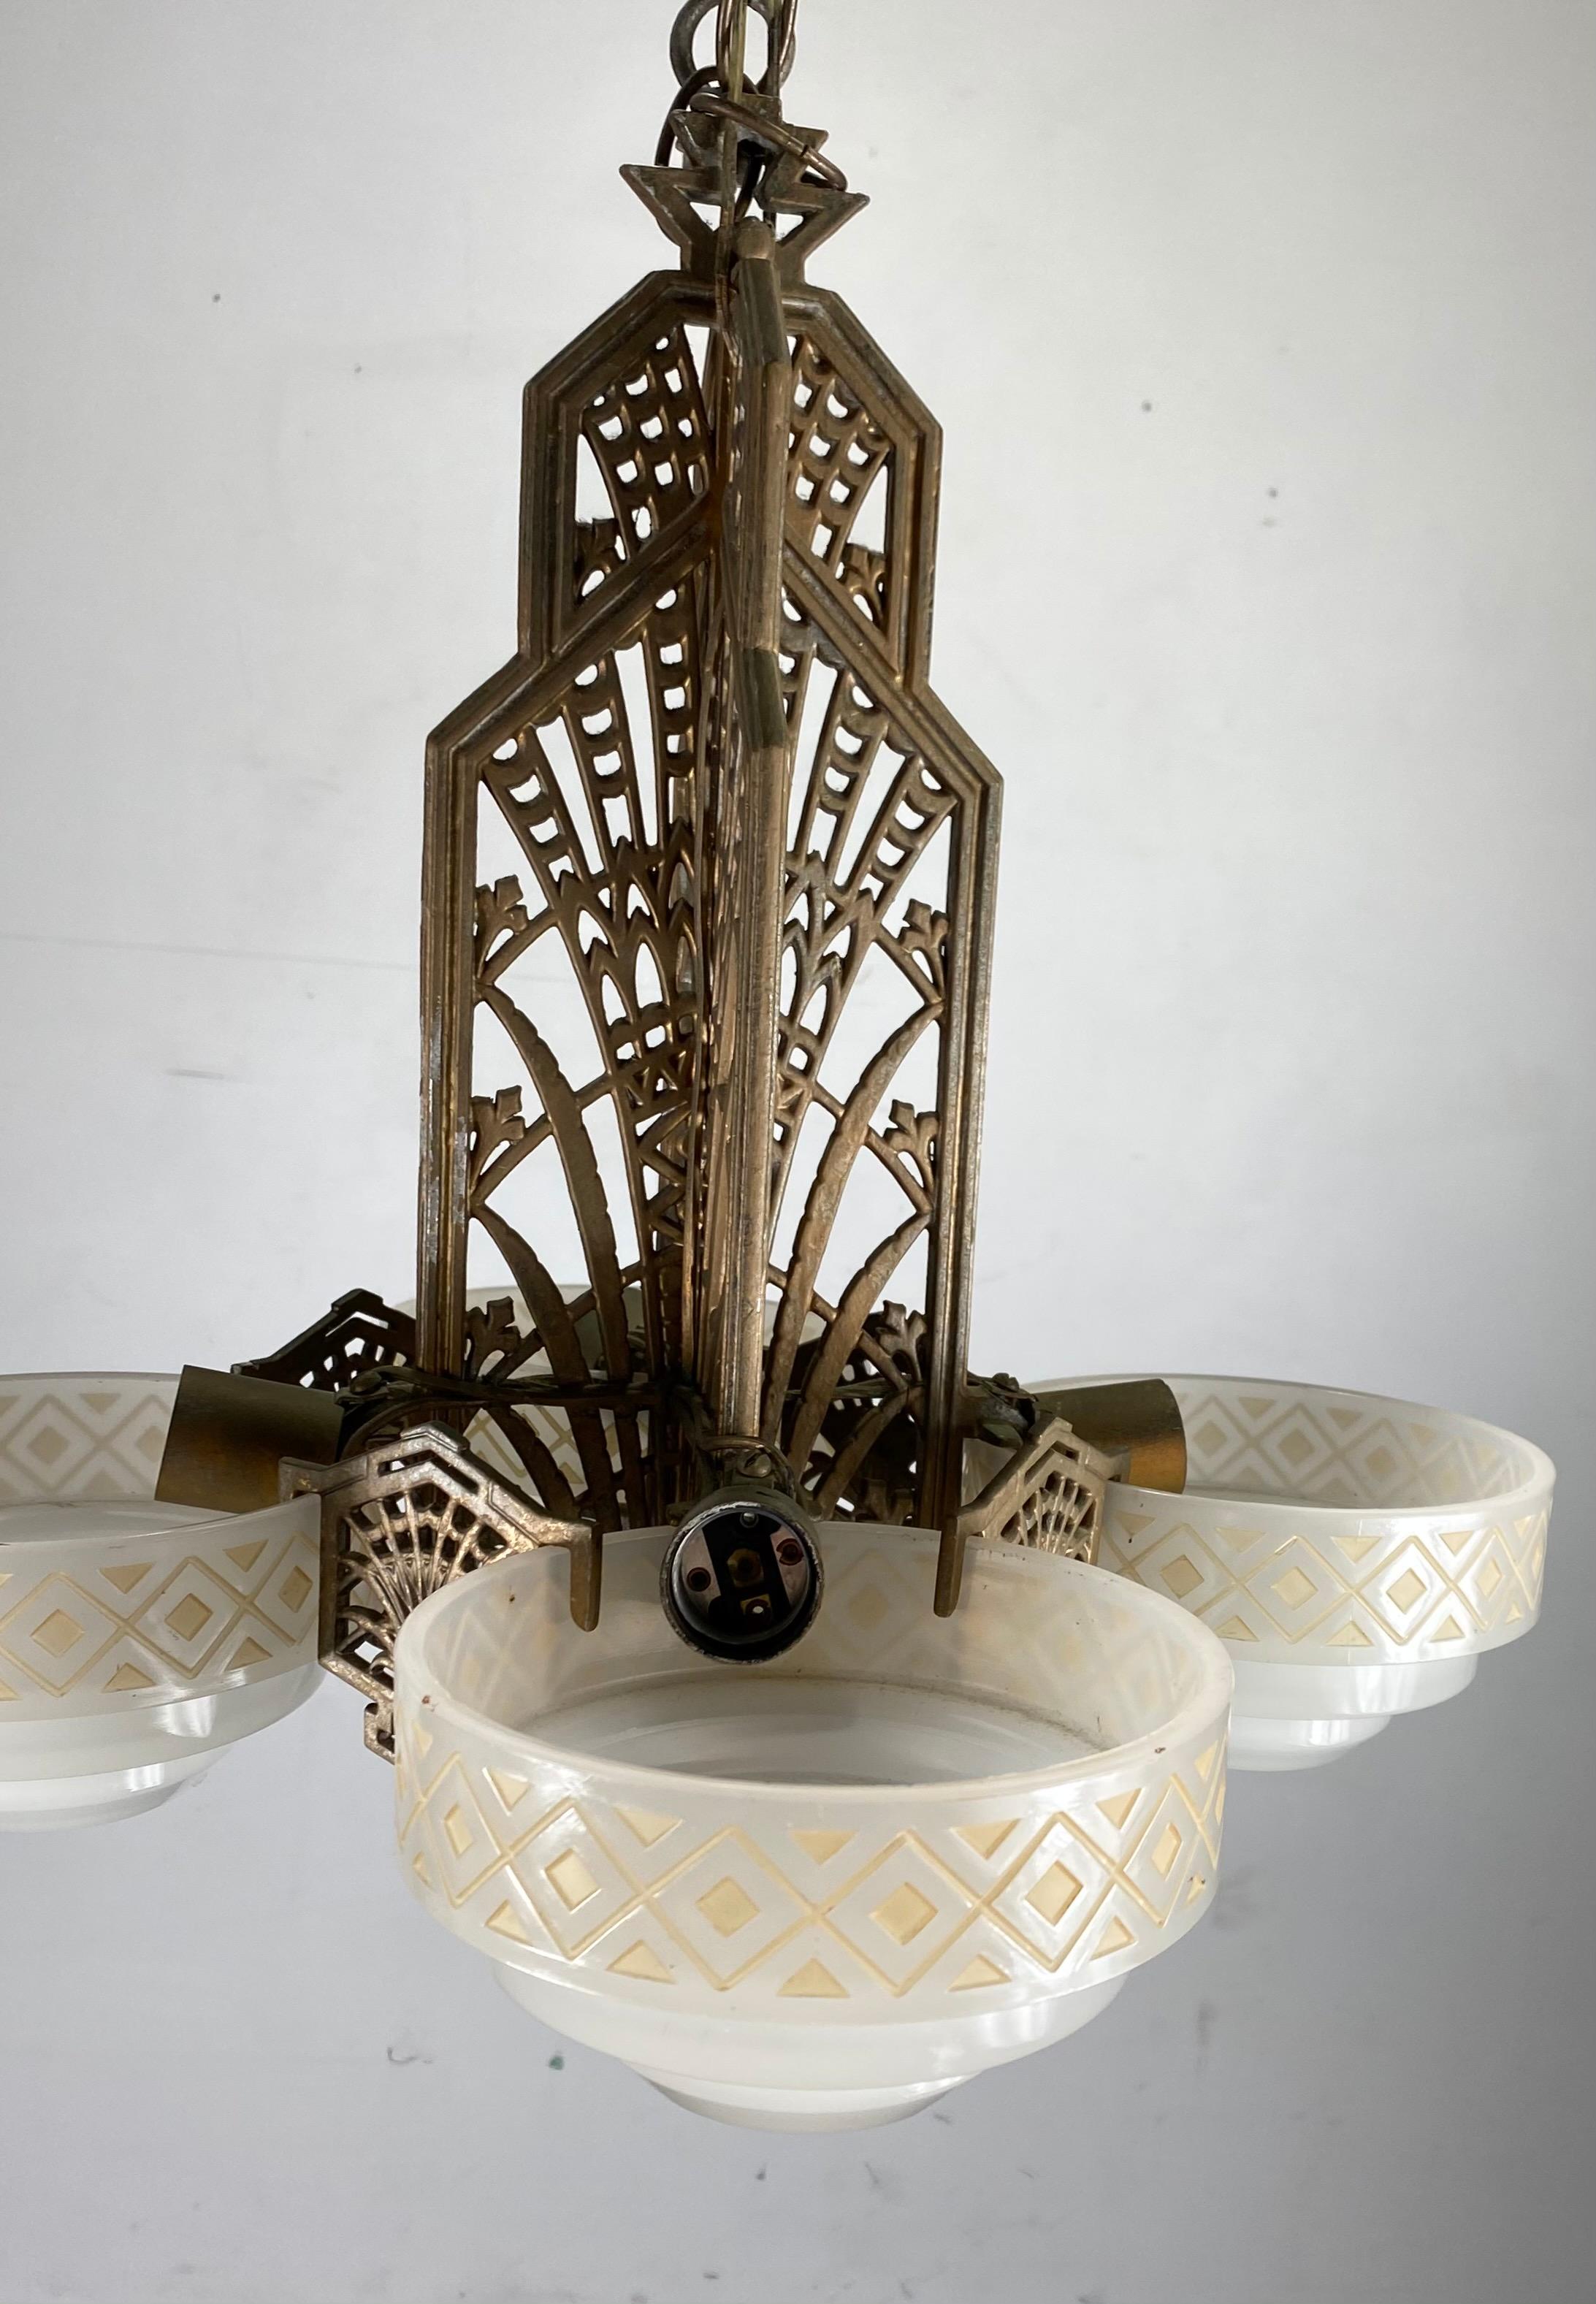 Cast 1930s 4-Shade Art Deco Hanging Pendant Chandelier, Stylized Metalwork by Markel